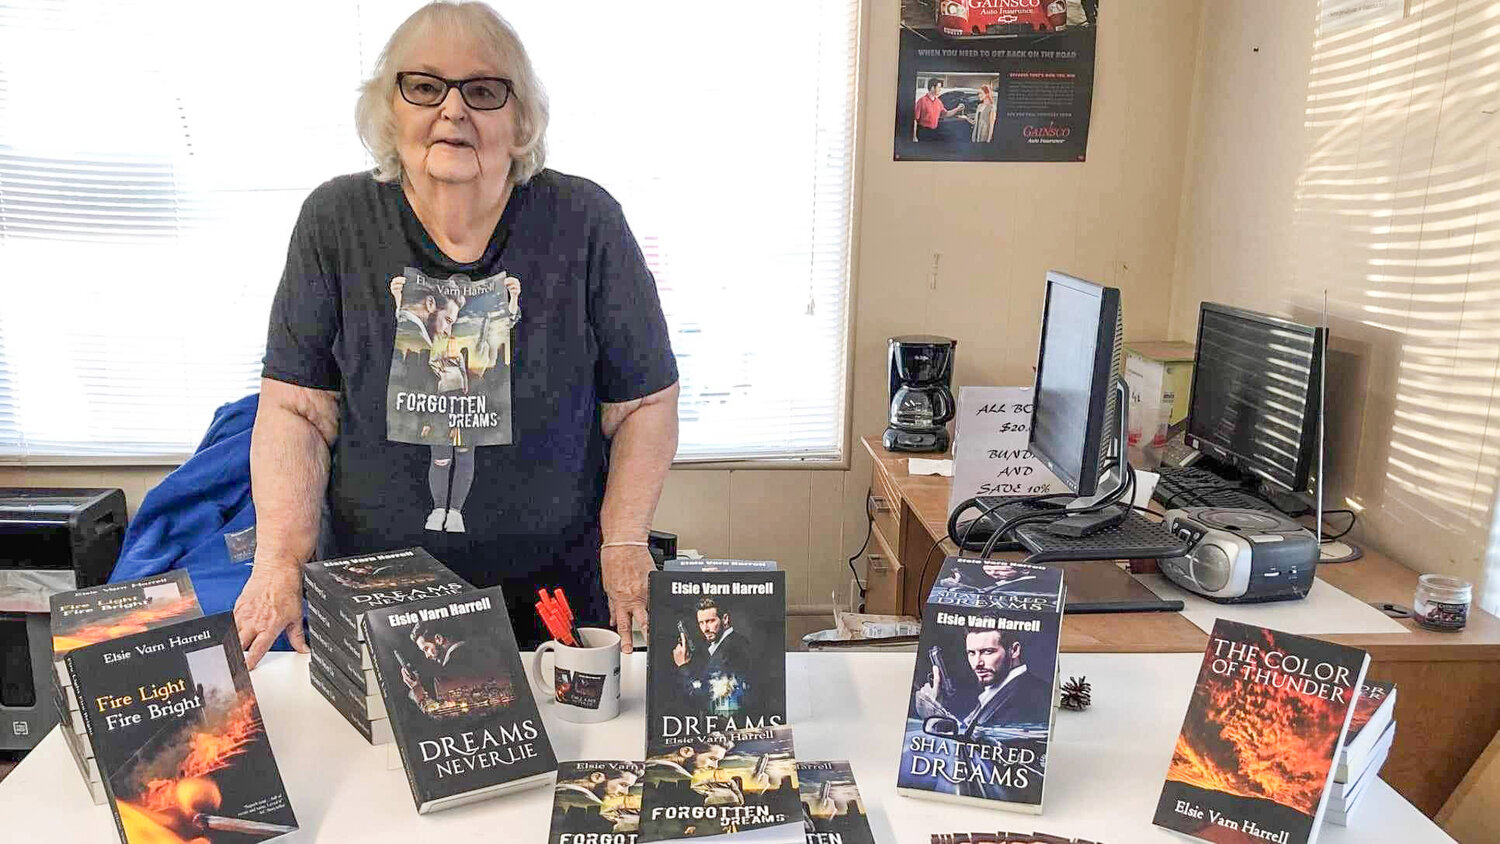 Elsie Harrell is a 79-year-old Lipan resident who still works full time in Stephenville and writes books on the side. She currently has six books published and is working on a seventh.